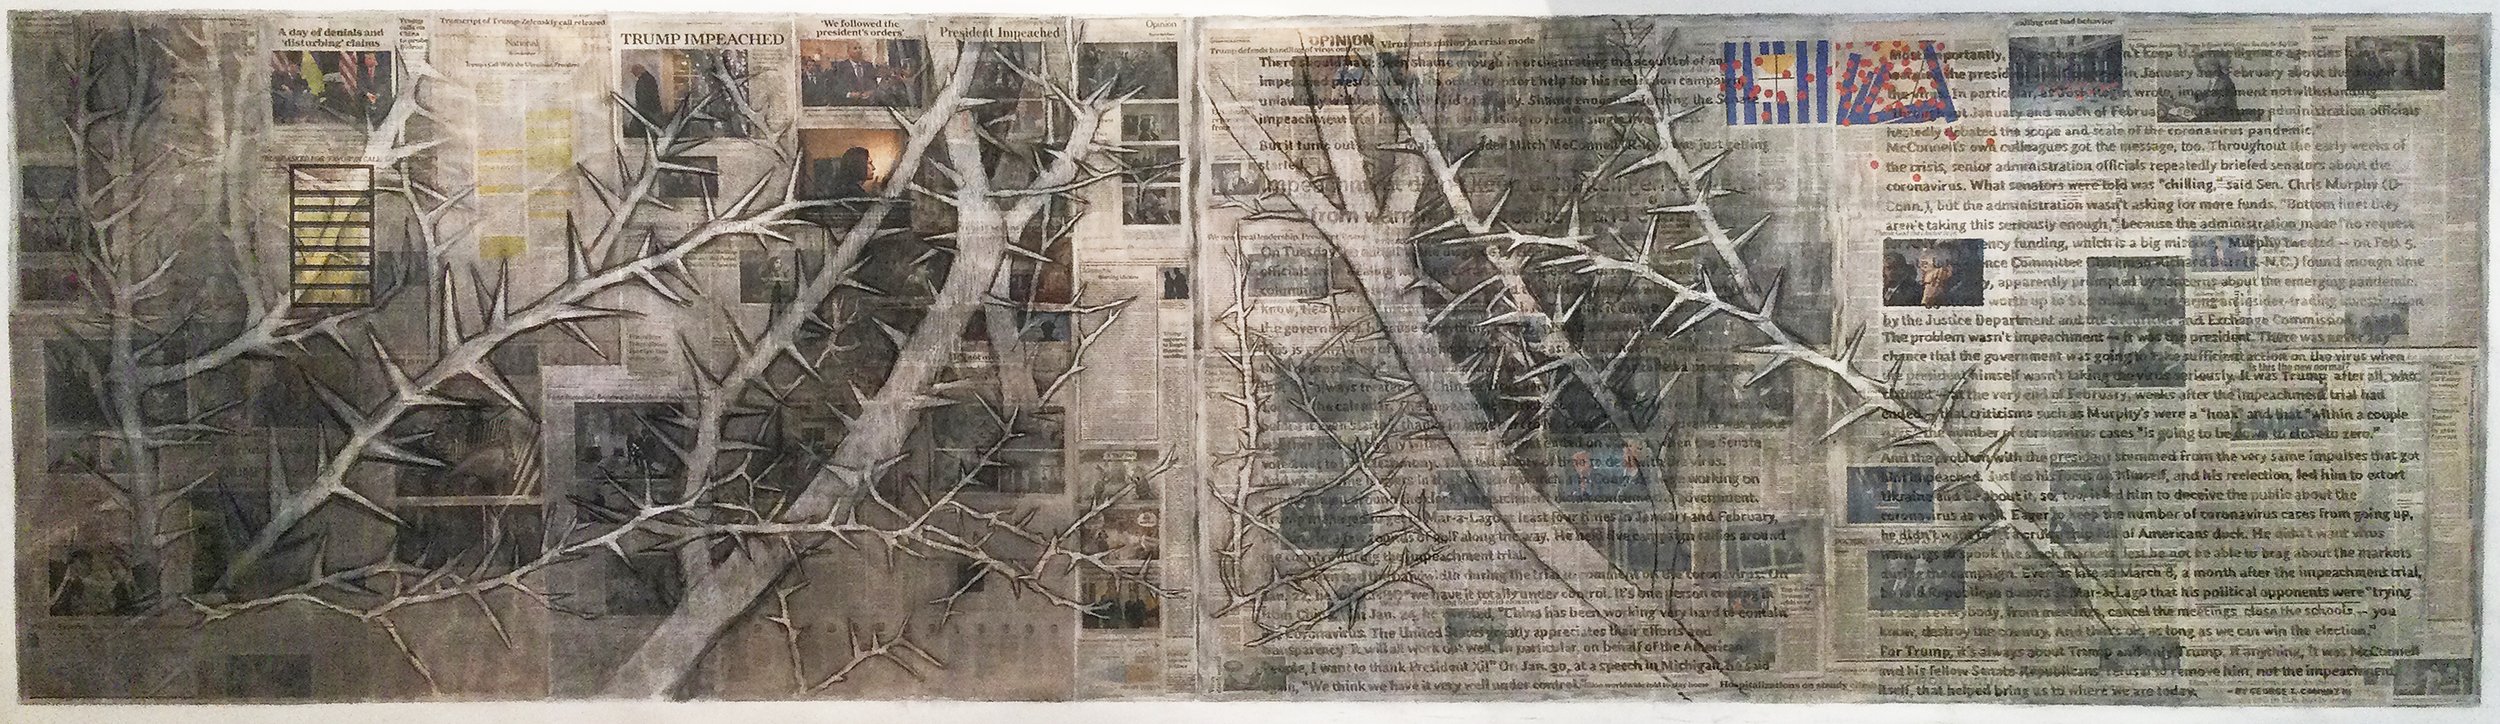 2Ag(0) - Pandemic Lamentations, Part 1-52x108 in. charcoal, pastel, ink, collage on paper, 2020.jpg